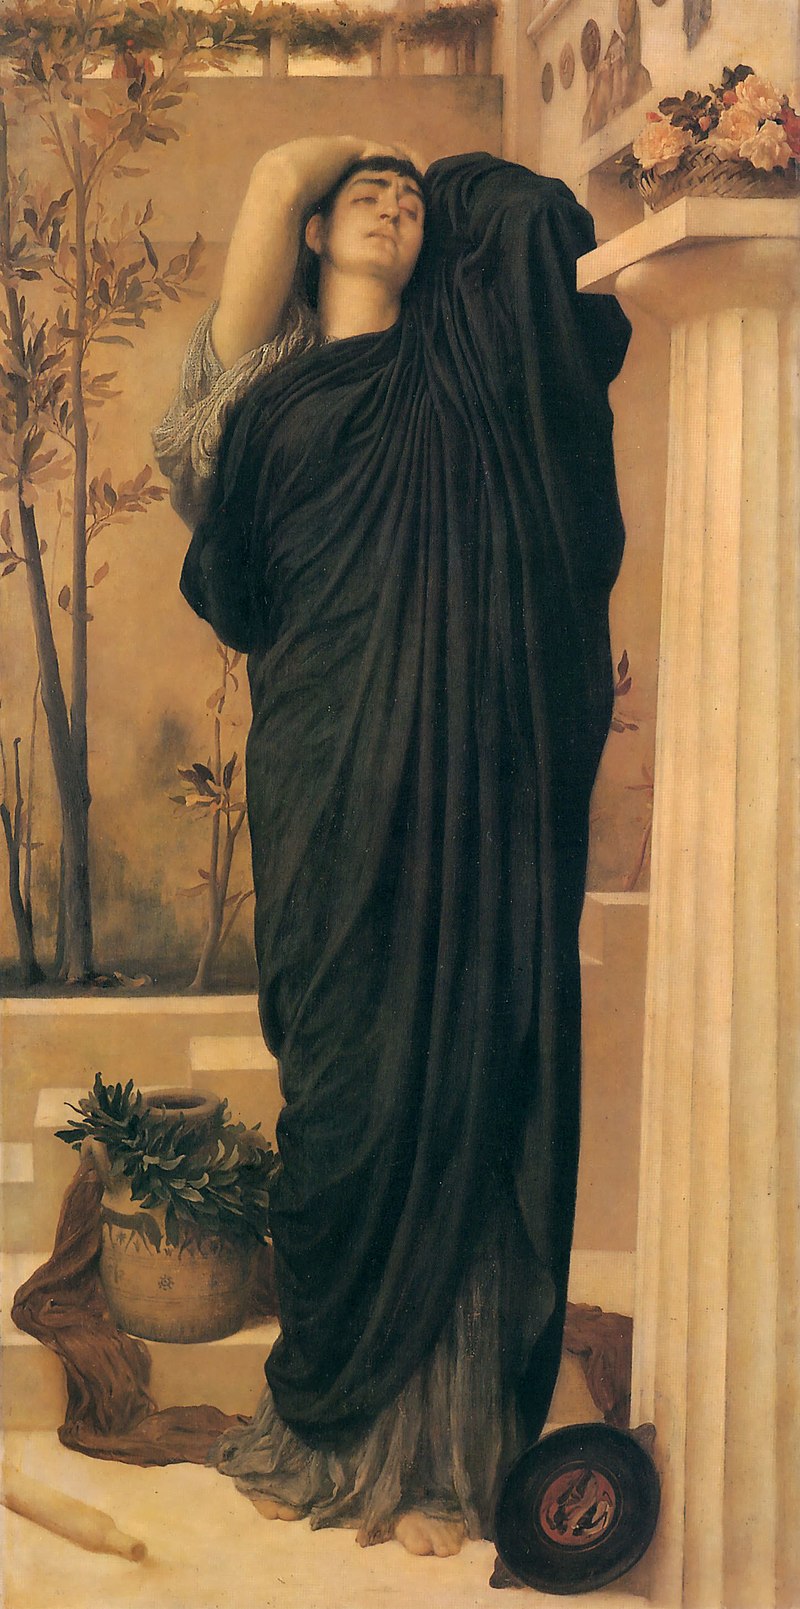 800px-1869_Frederic_Leighton_-_Electra_at_the_Tomb_of_Agamemnon.jpg